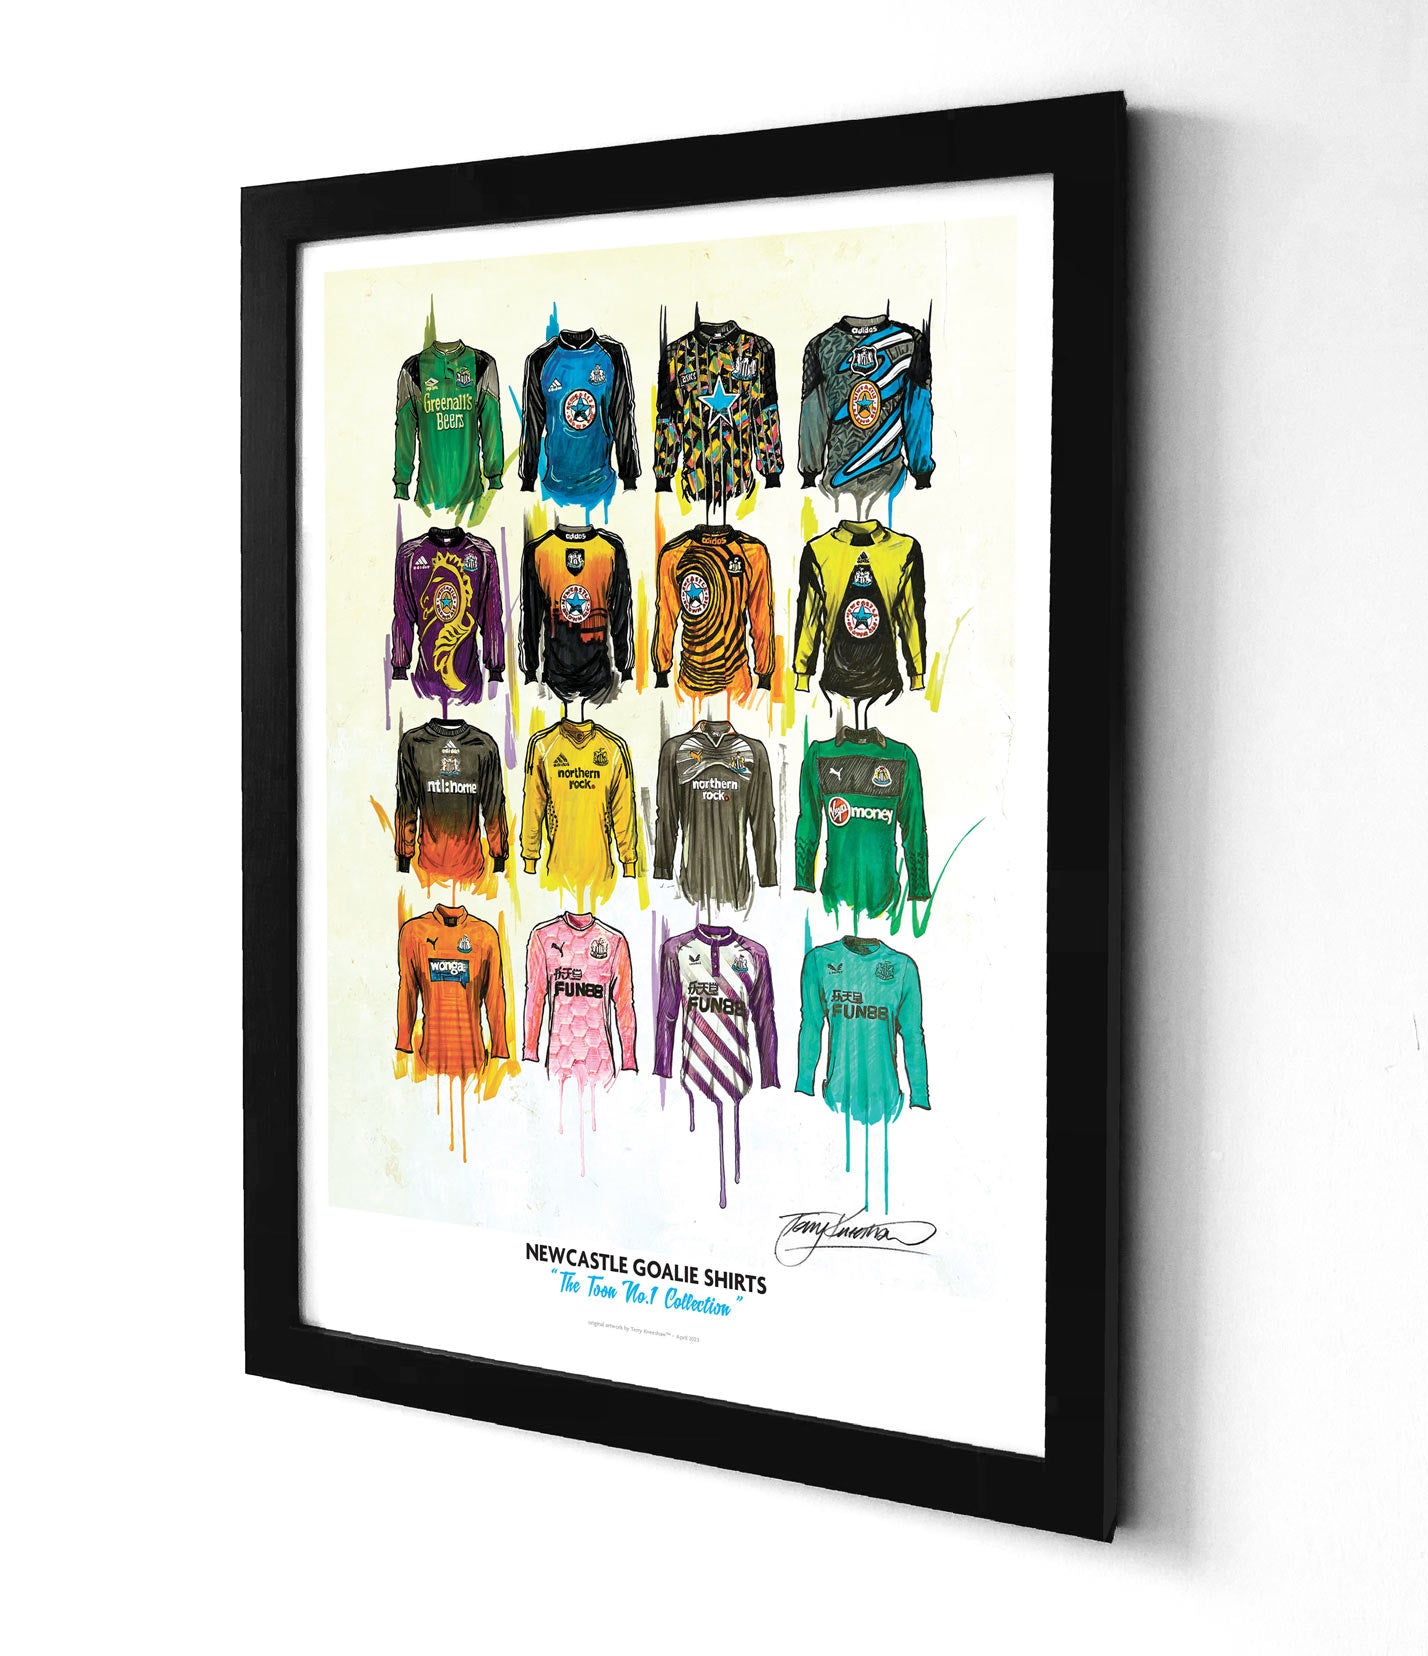 Terry Kneeshaw's limited edition A2 print showcases his artwork featuring 16 different Newcastle United Football Club Goal Keeper jerseys from various eras. 